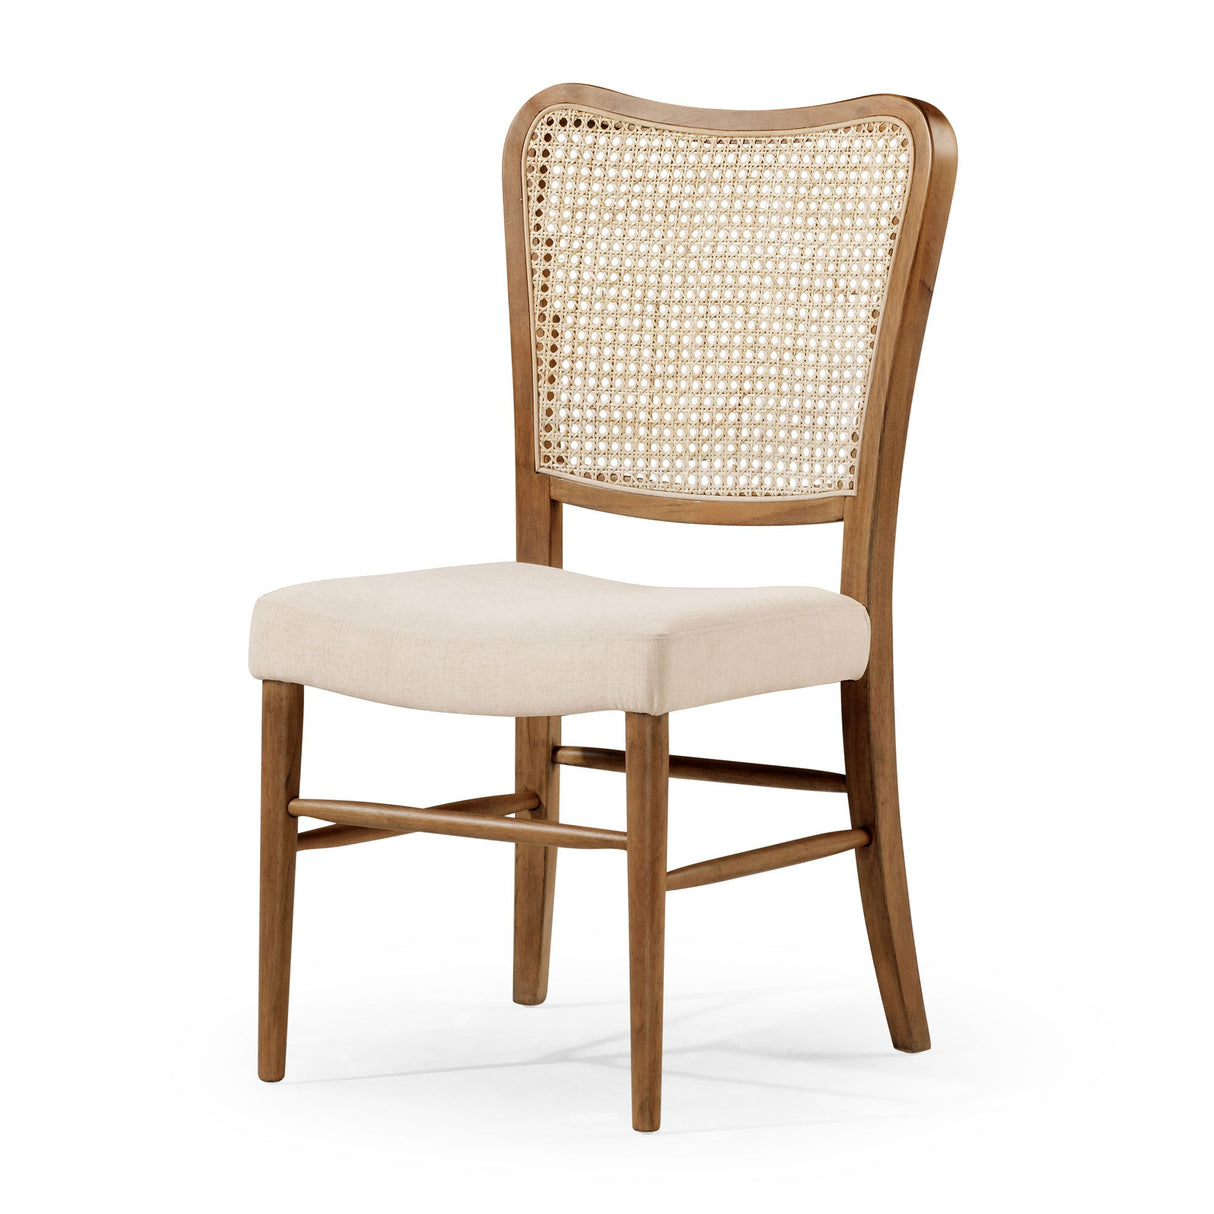 Maven Lane Vera Wood Dining Chair, Antique Natural & Taupe Linen Fabric, Set of 2